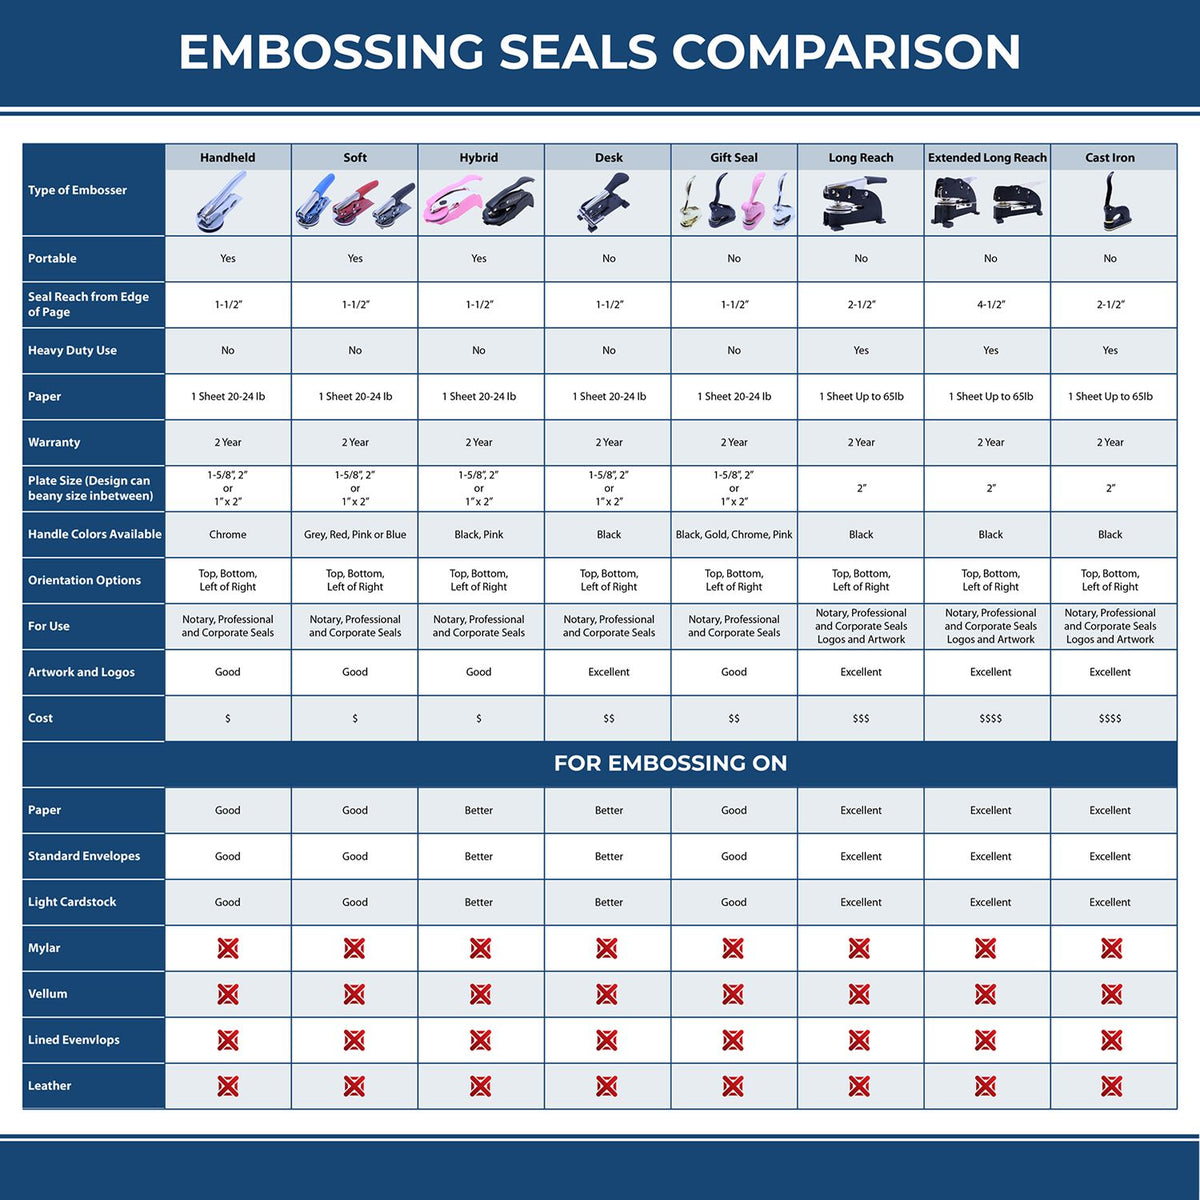 A comparison chart for the different types of mount models available for the Hybrid Nebraska Architect Seal